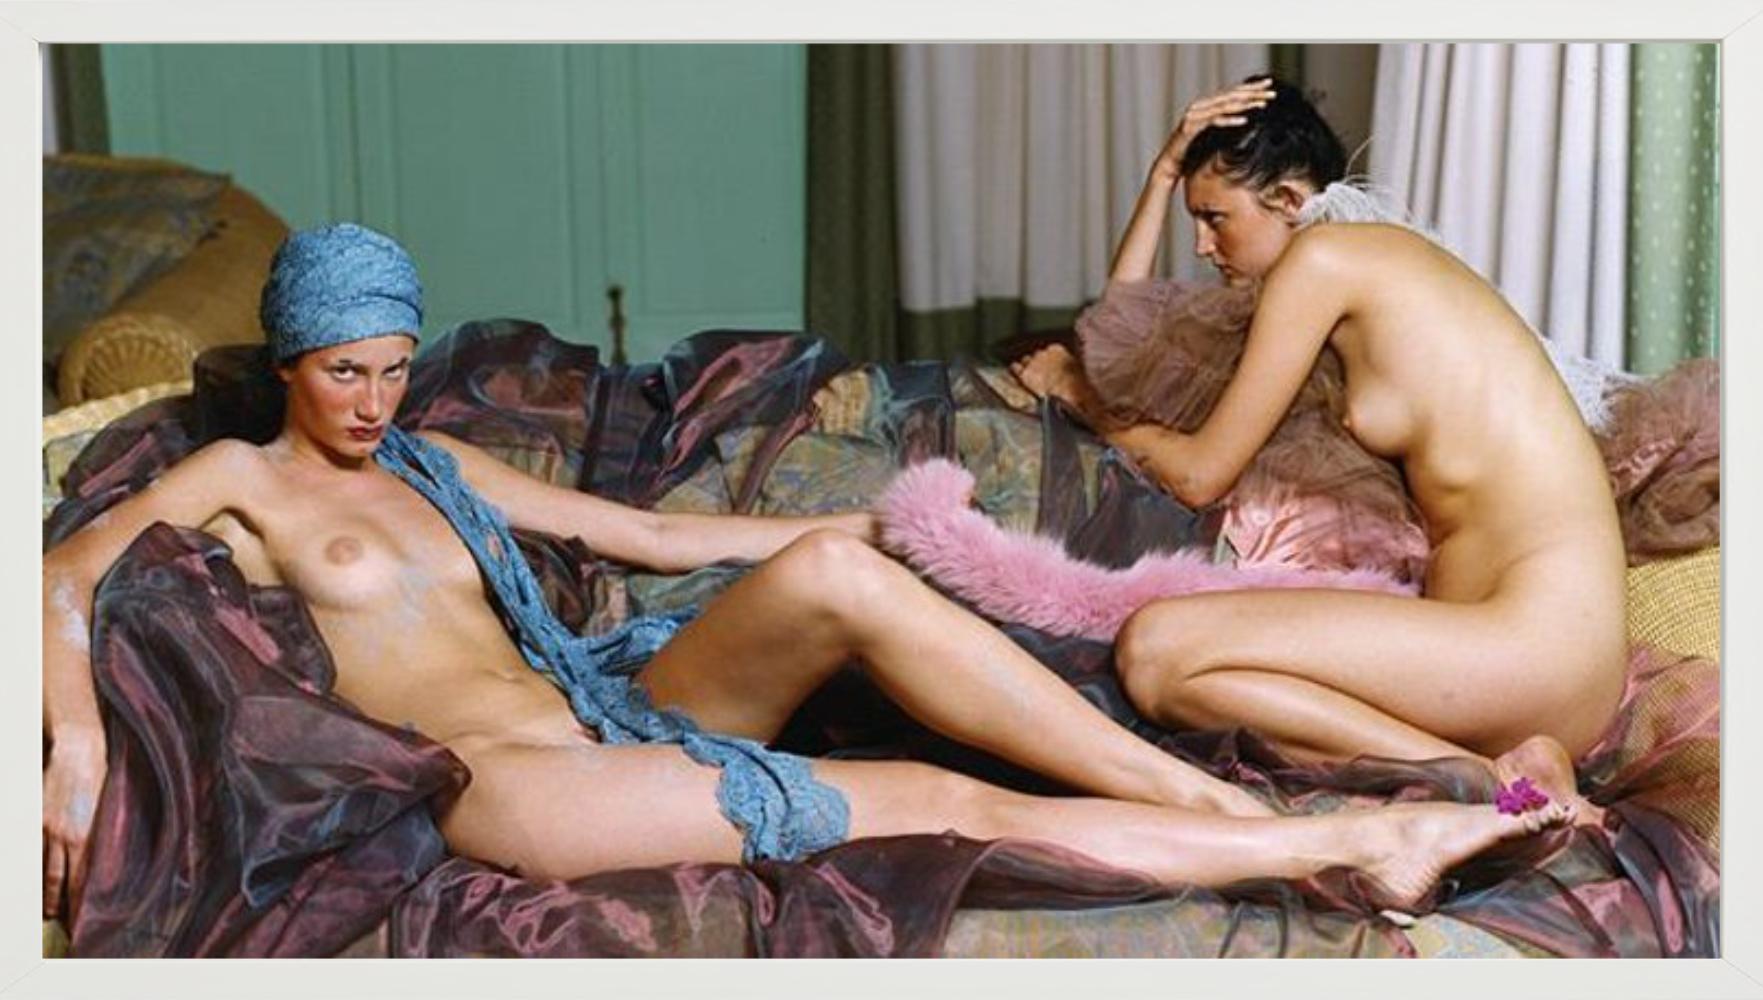 Lanzarote #1 - two nude models posing on a sofa, fine art photography - Photograph by Iris Brosch